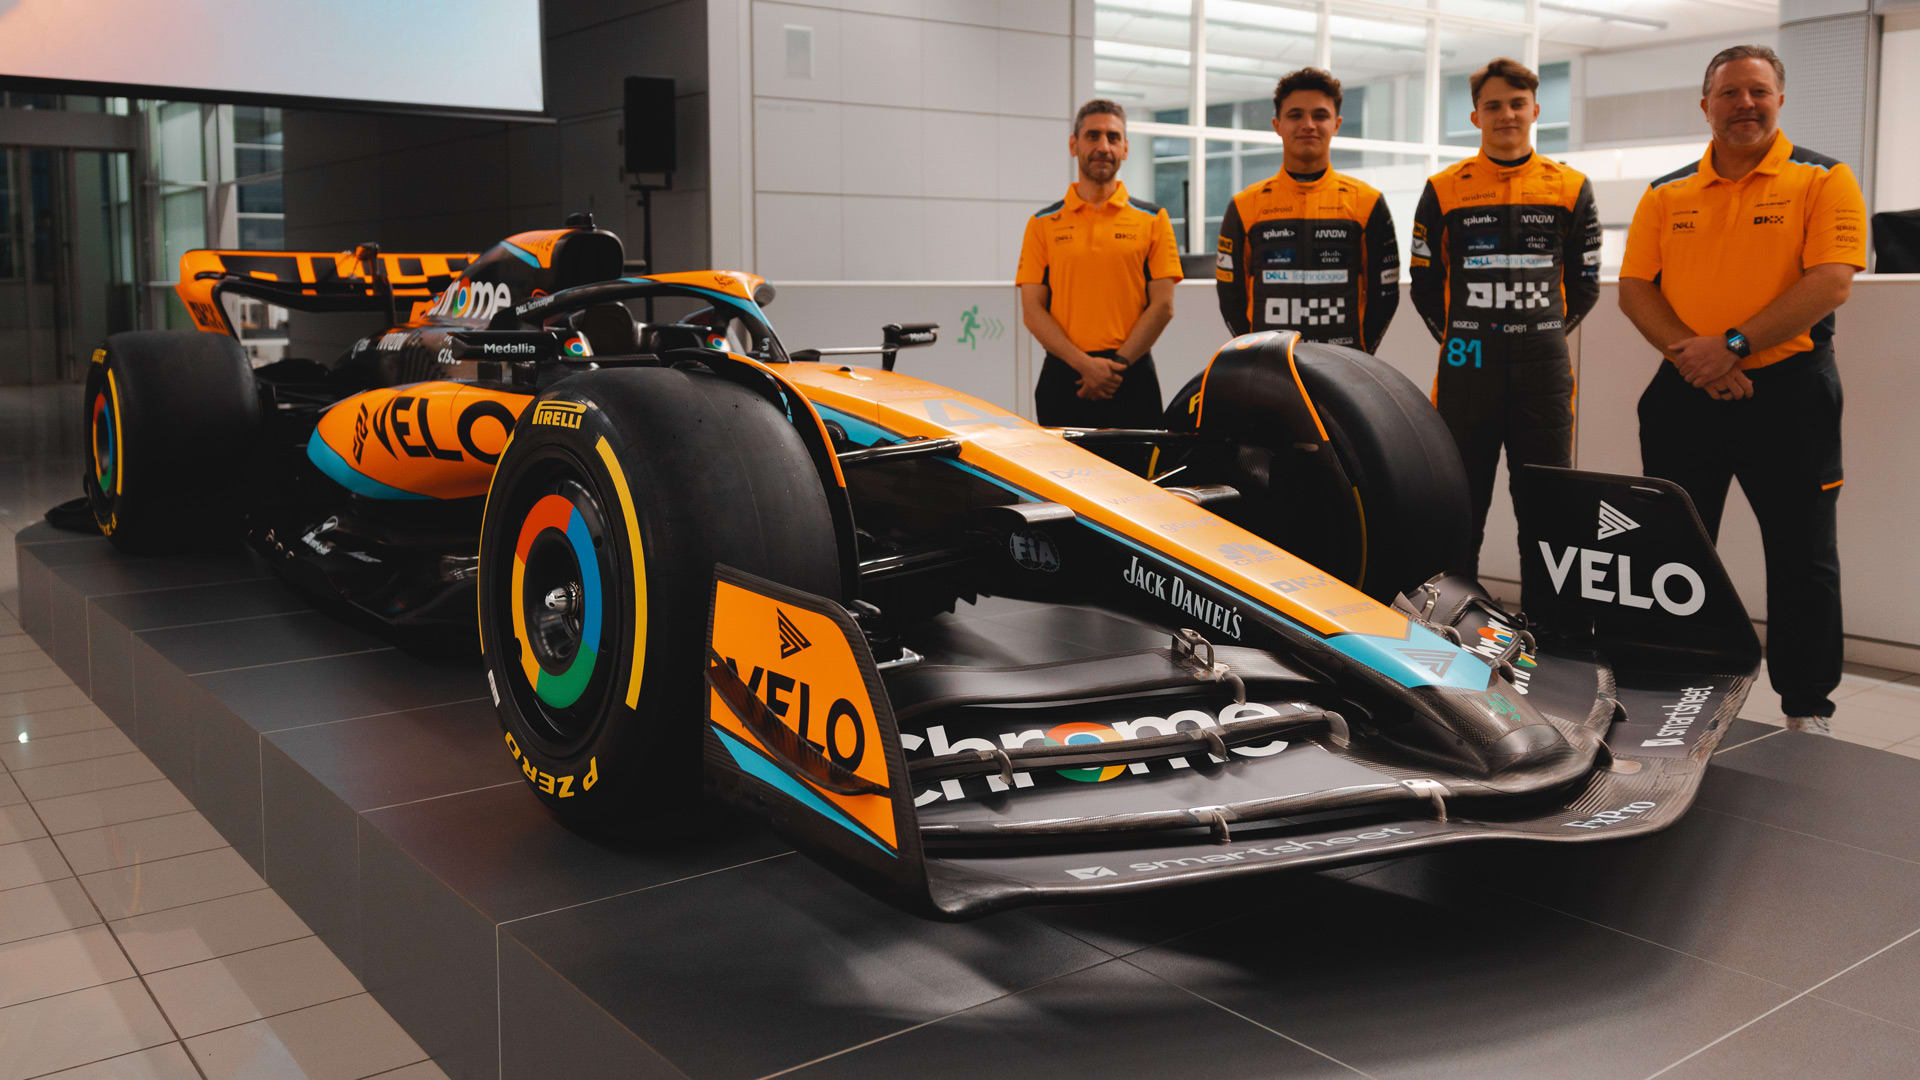 Can McLaren boss the midfield this season? @lawrobarretto assesses their prospe... Tweet From Marvel